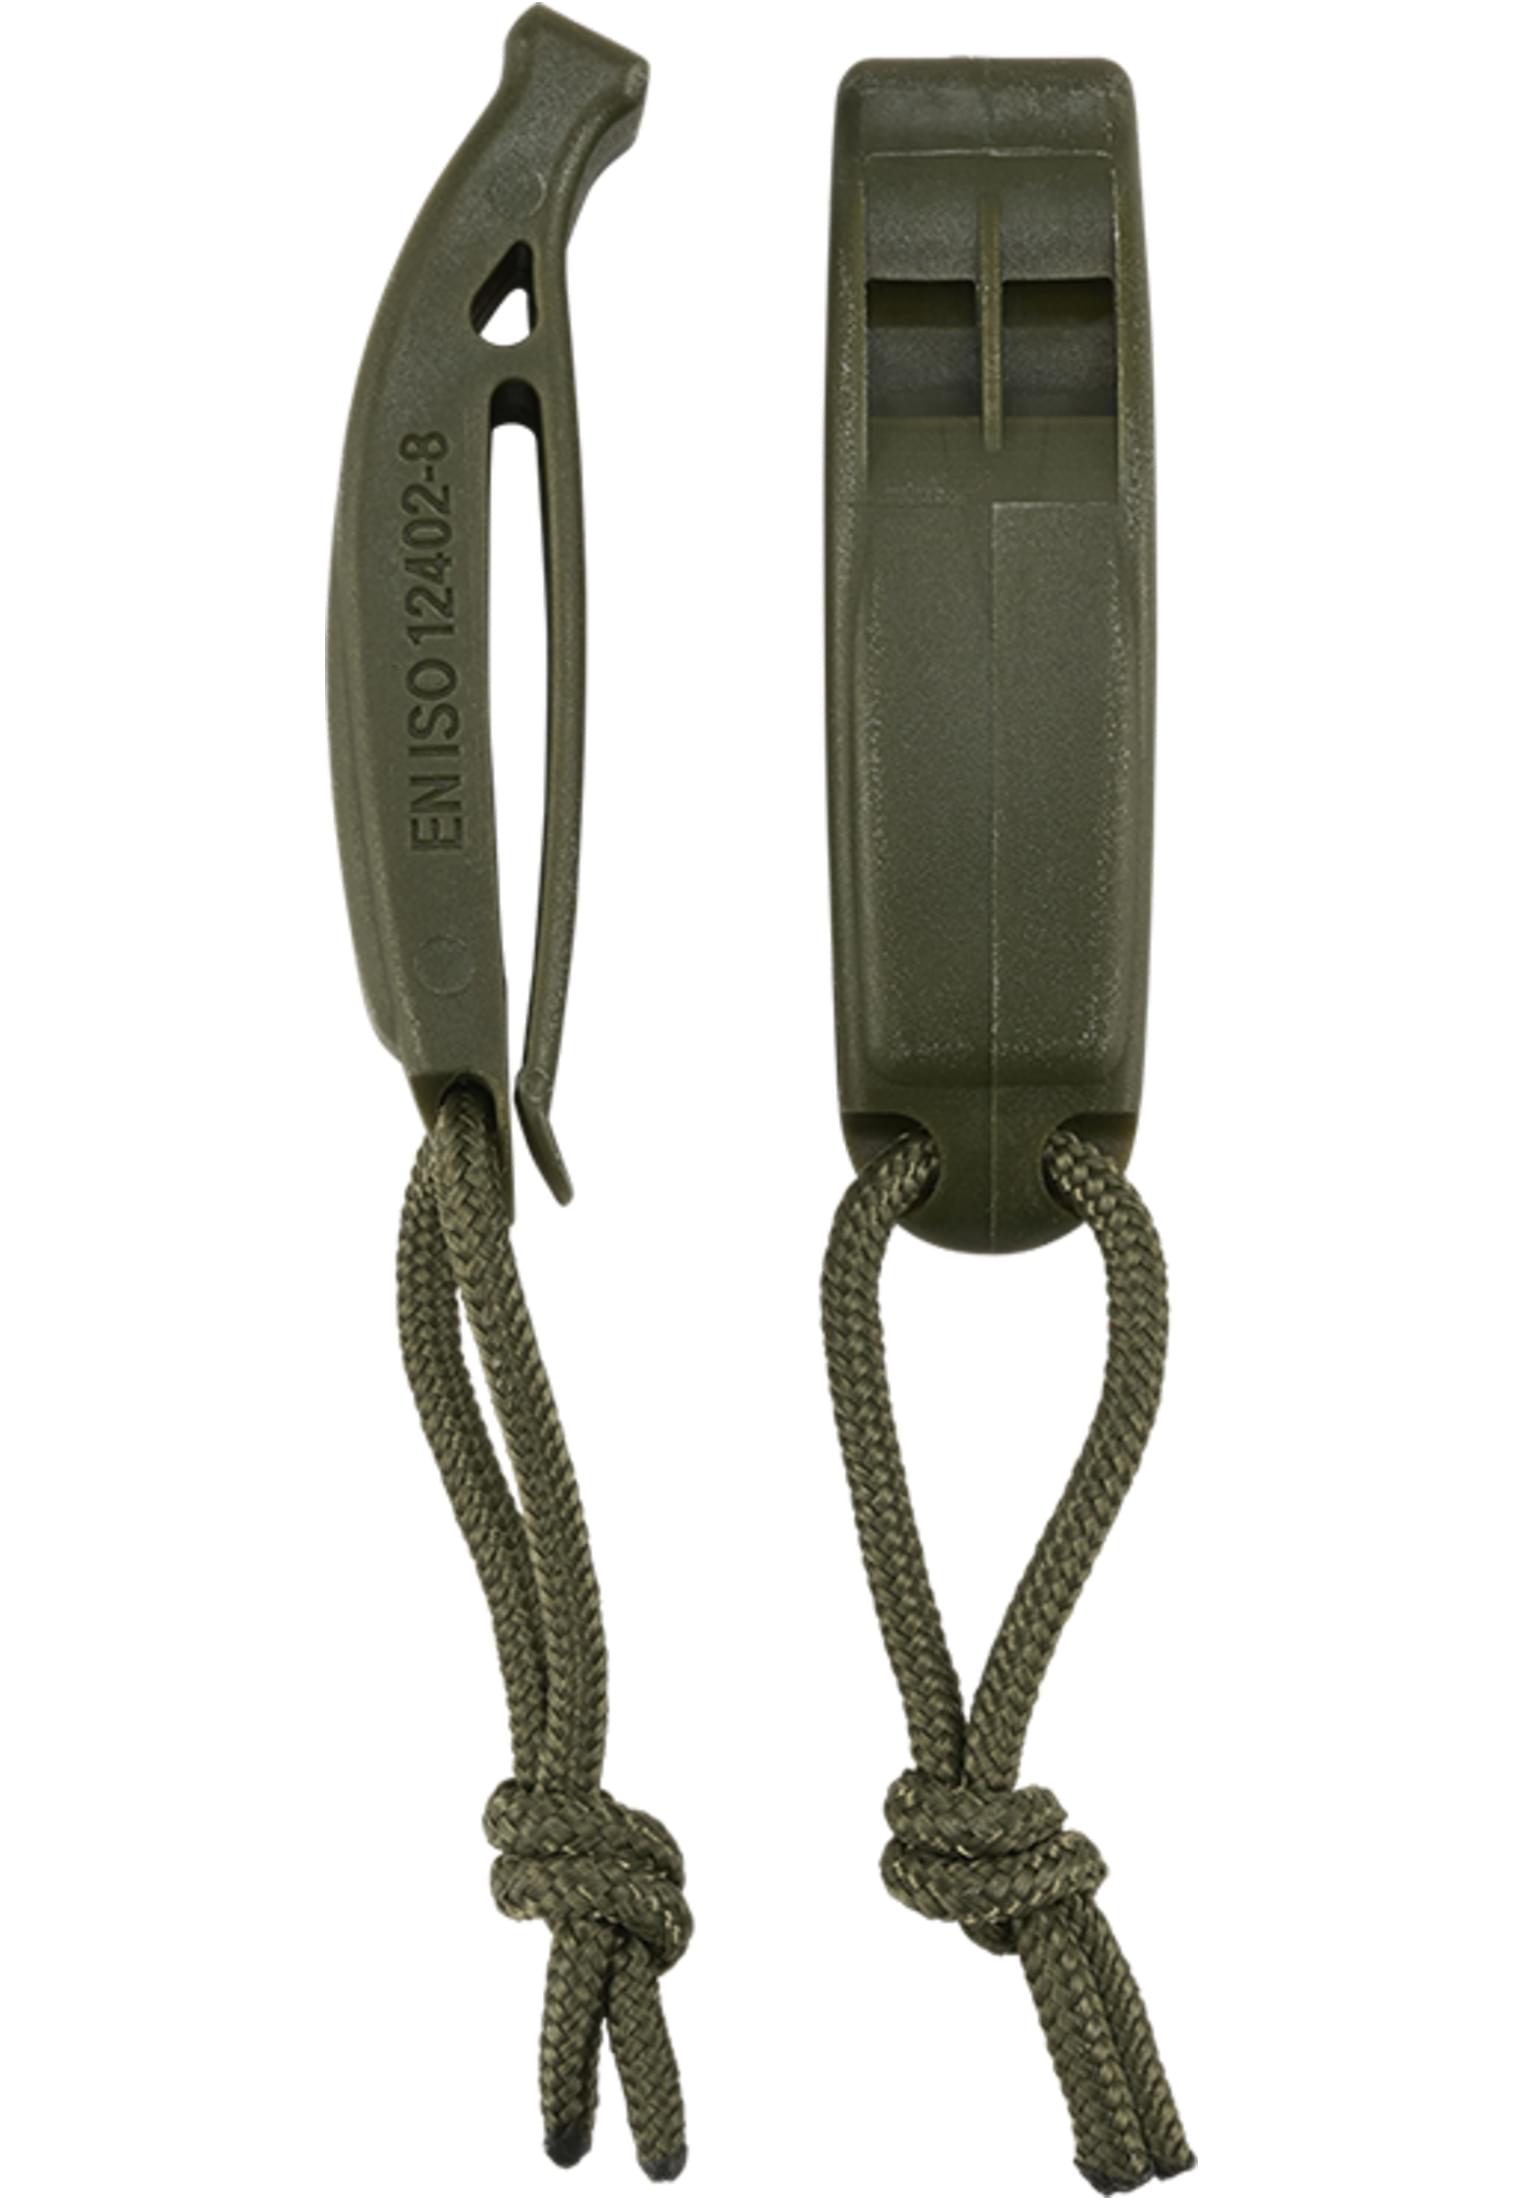 Signal Whistle Molle 2-Pack olivový